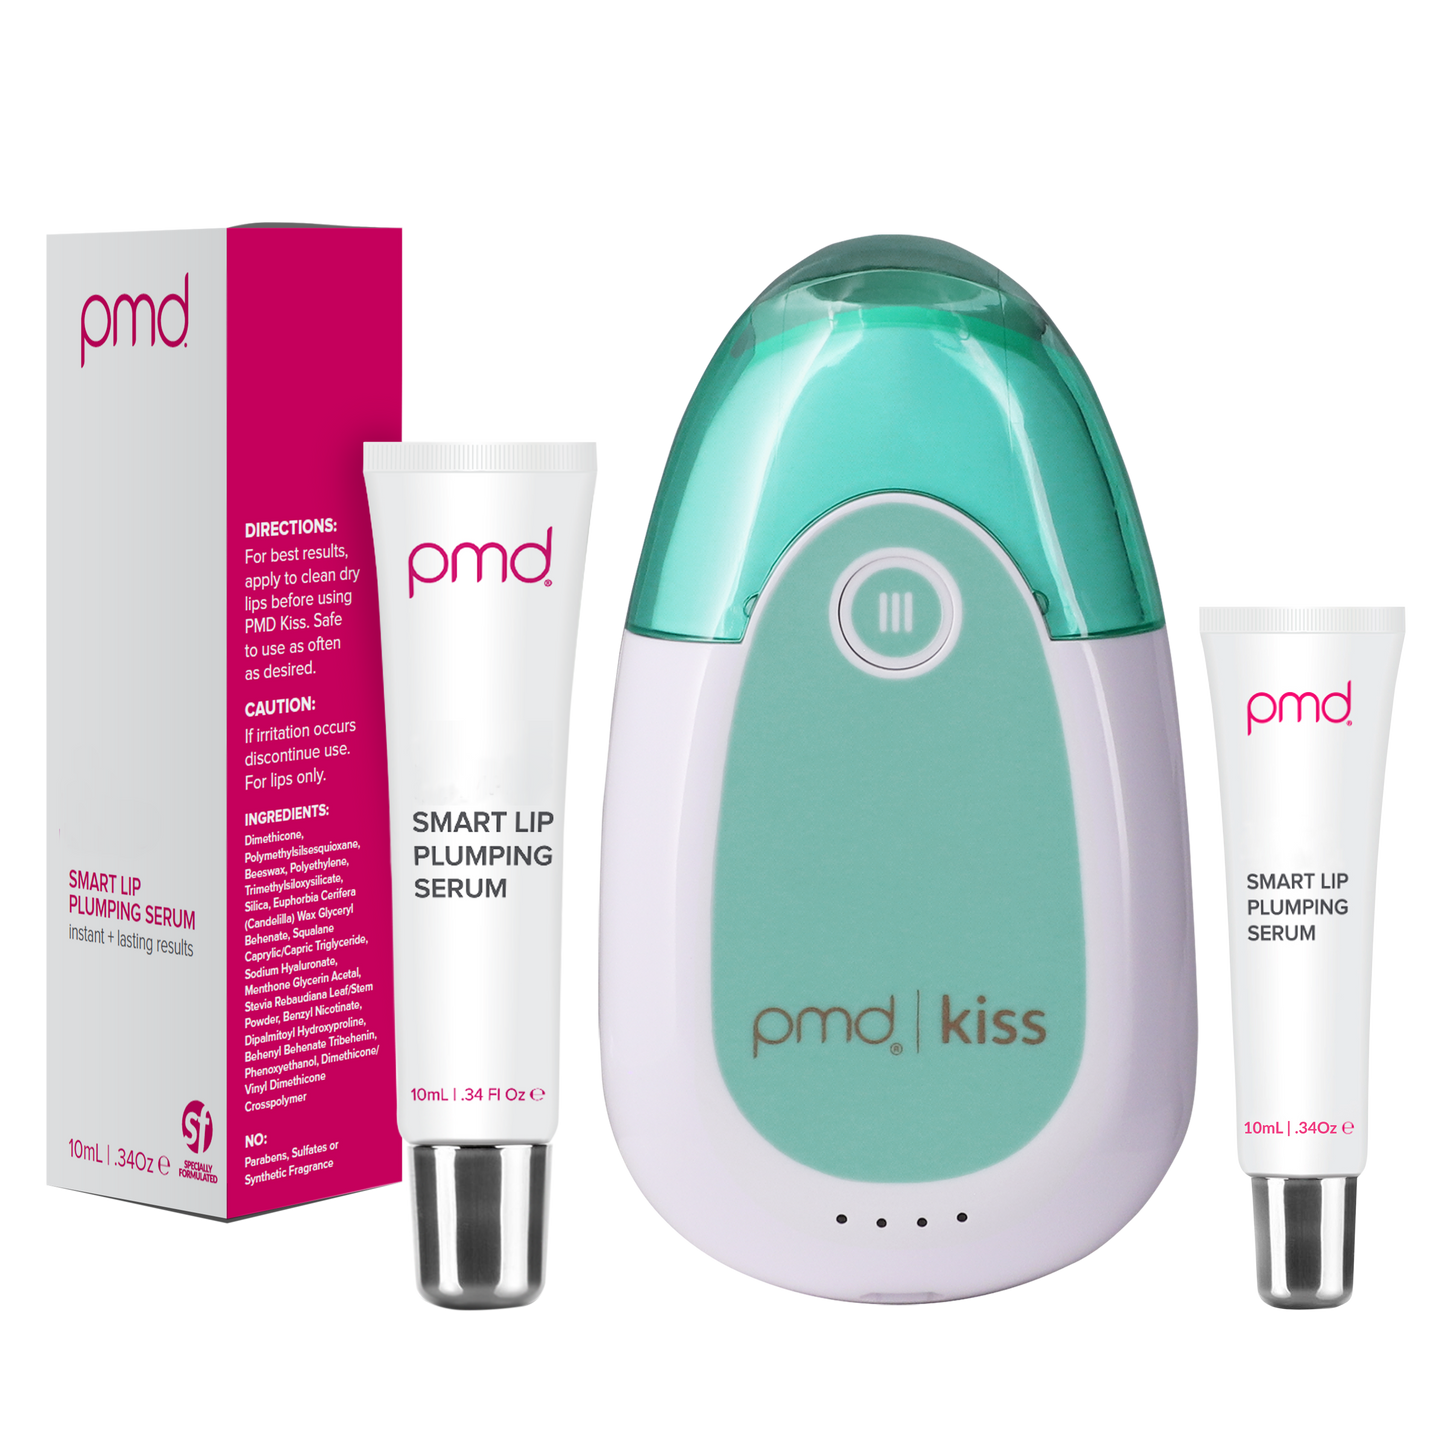 BNDL_plumped_teal?PMD Kiss System in Teal & Smart Lip Plumping Serum